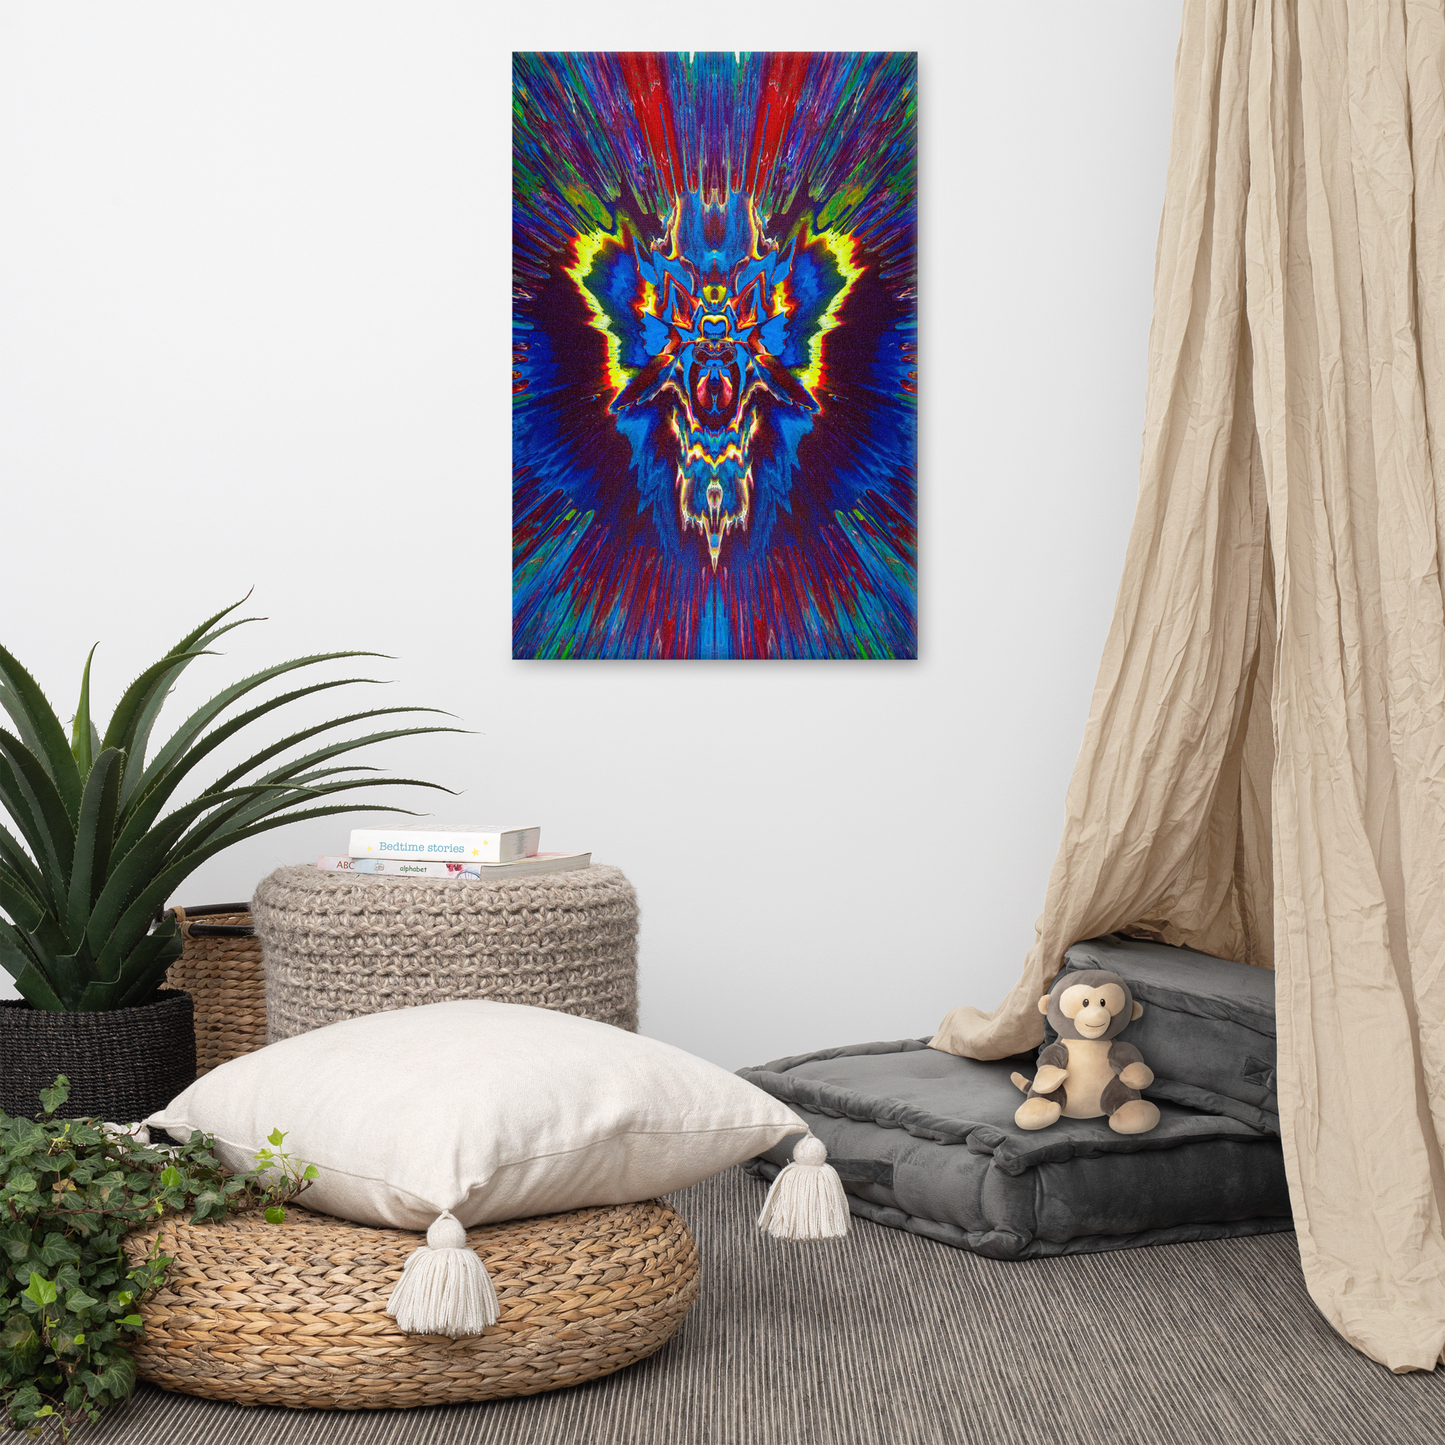 NightOwl Studio Abstract Wall Art, Angel Storm, Boho Living Room, Bedroom, Office, and Home Decor, Premium Canvas with Wooden Frame, Acrylic Painting Reproduction, 24” x 36”